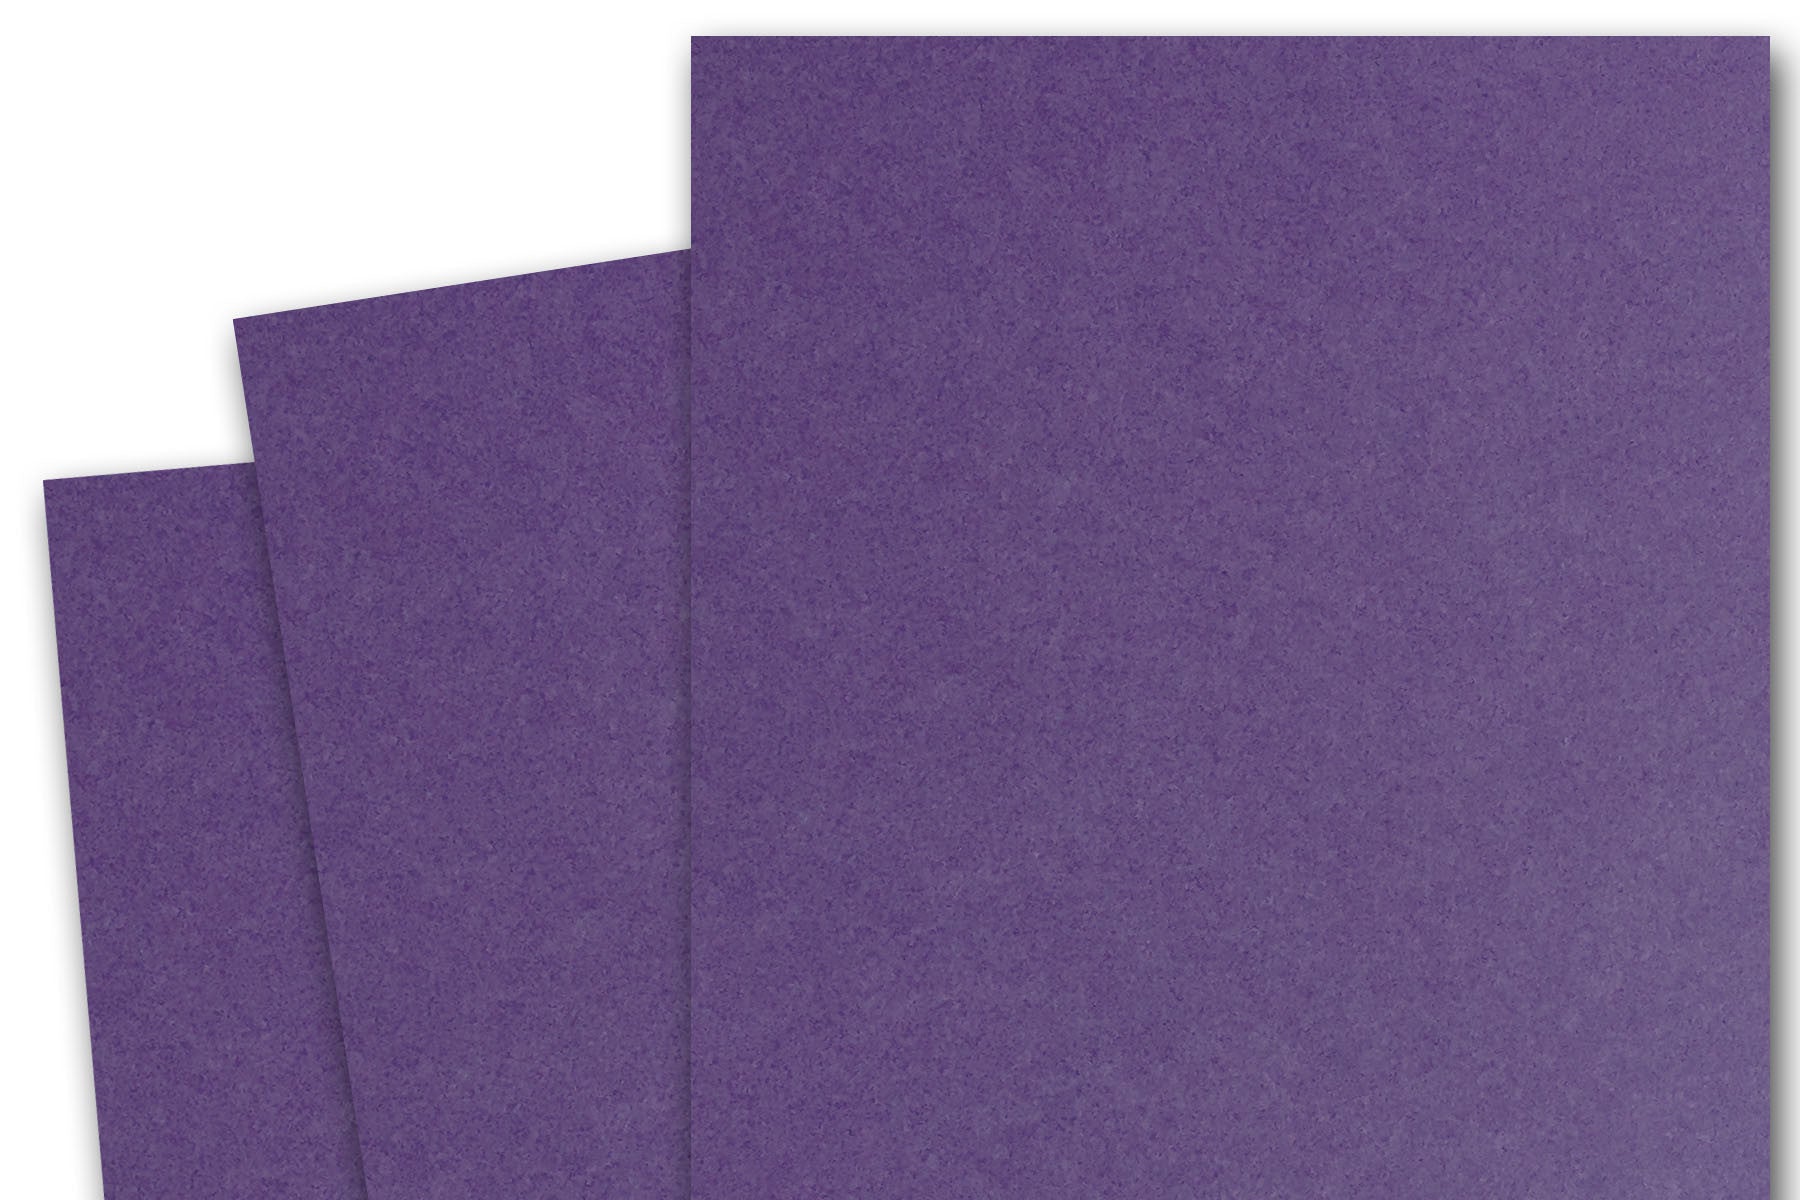 Paisley Purple Border 40 Sheets Of White Computer Paper 8.5 X 11 In.  (21x28cm)